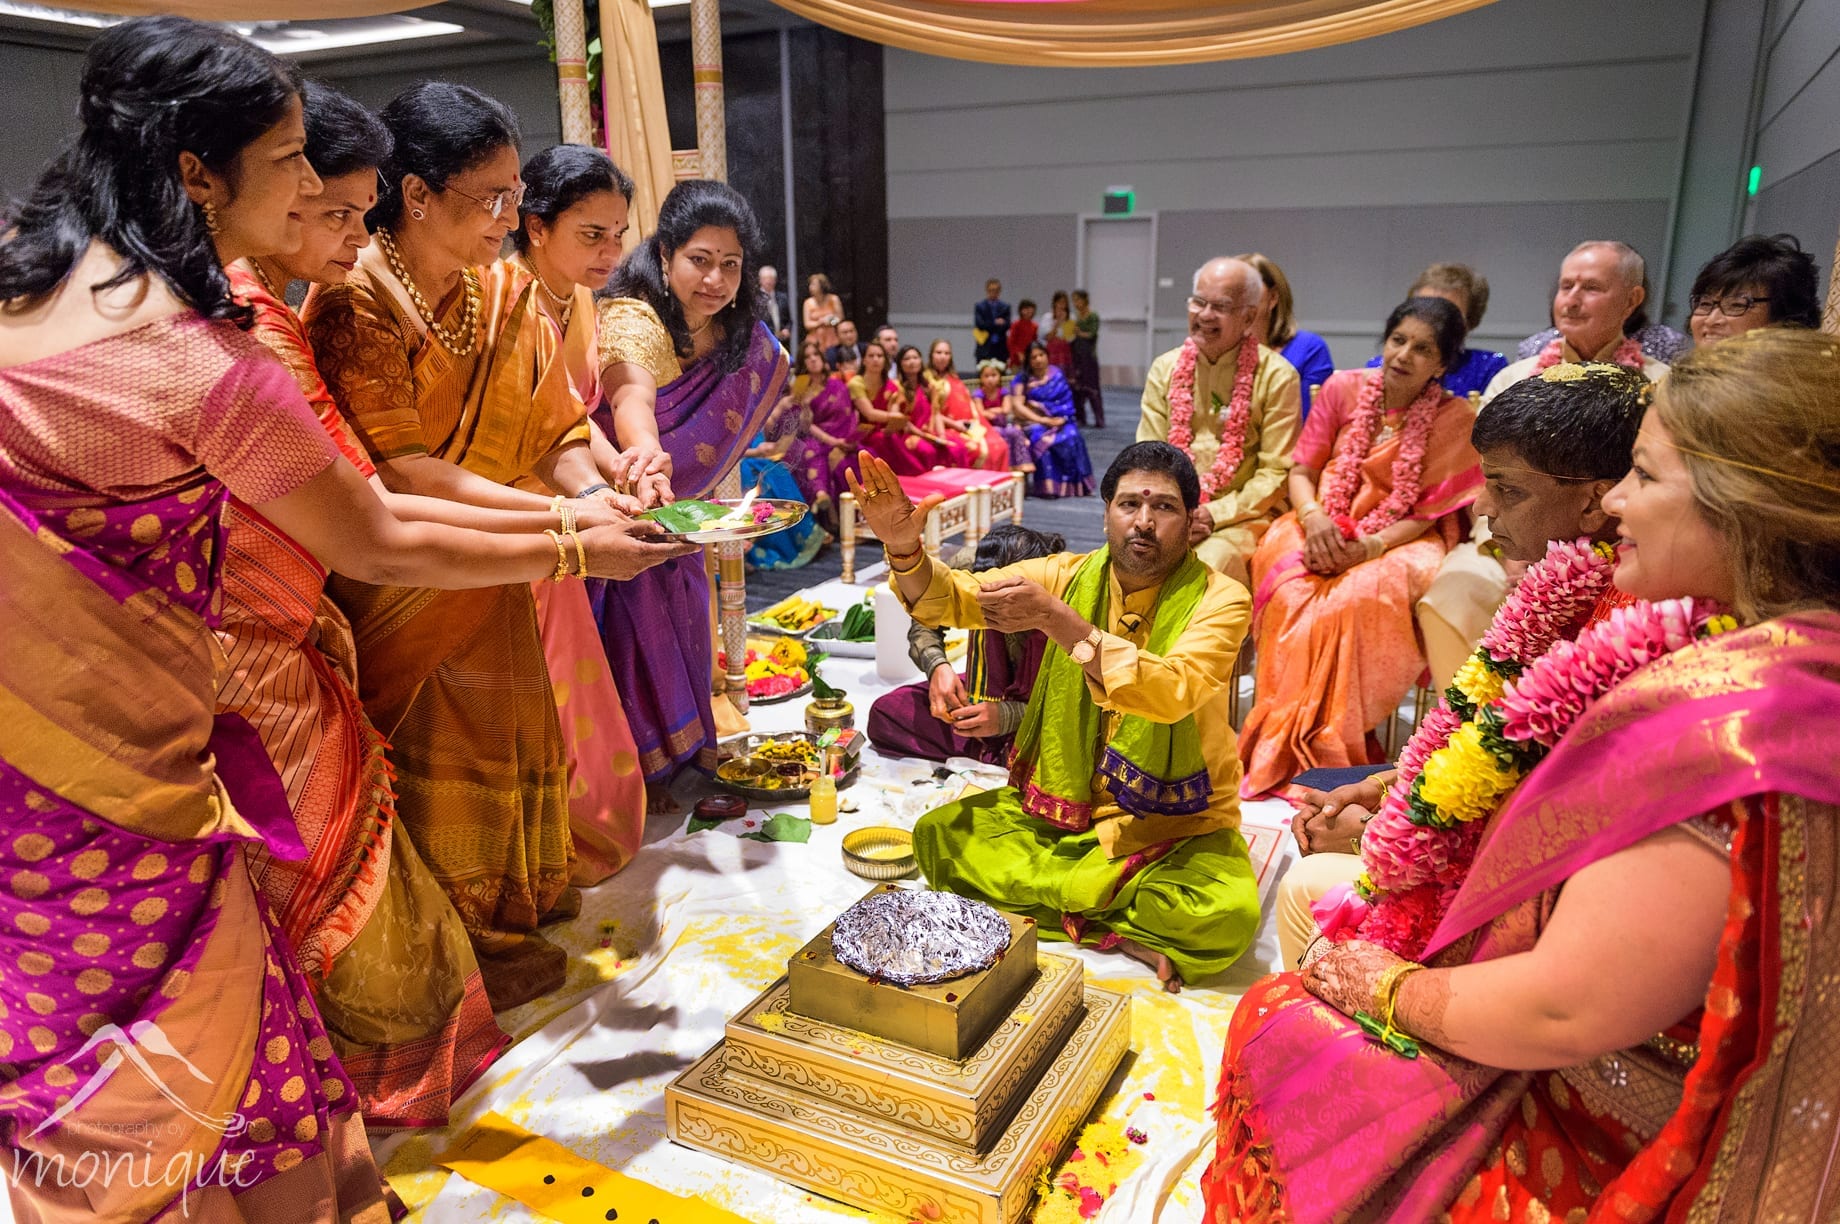 Bay Area Indian wedding photography of the Hindu ceremony